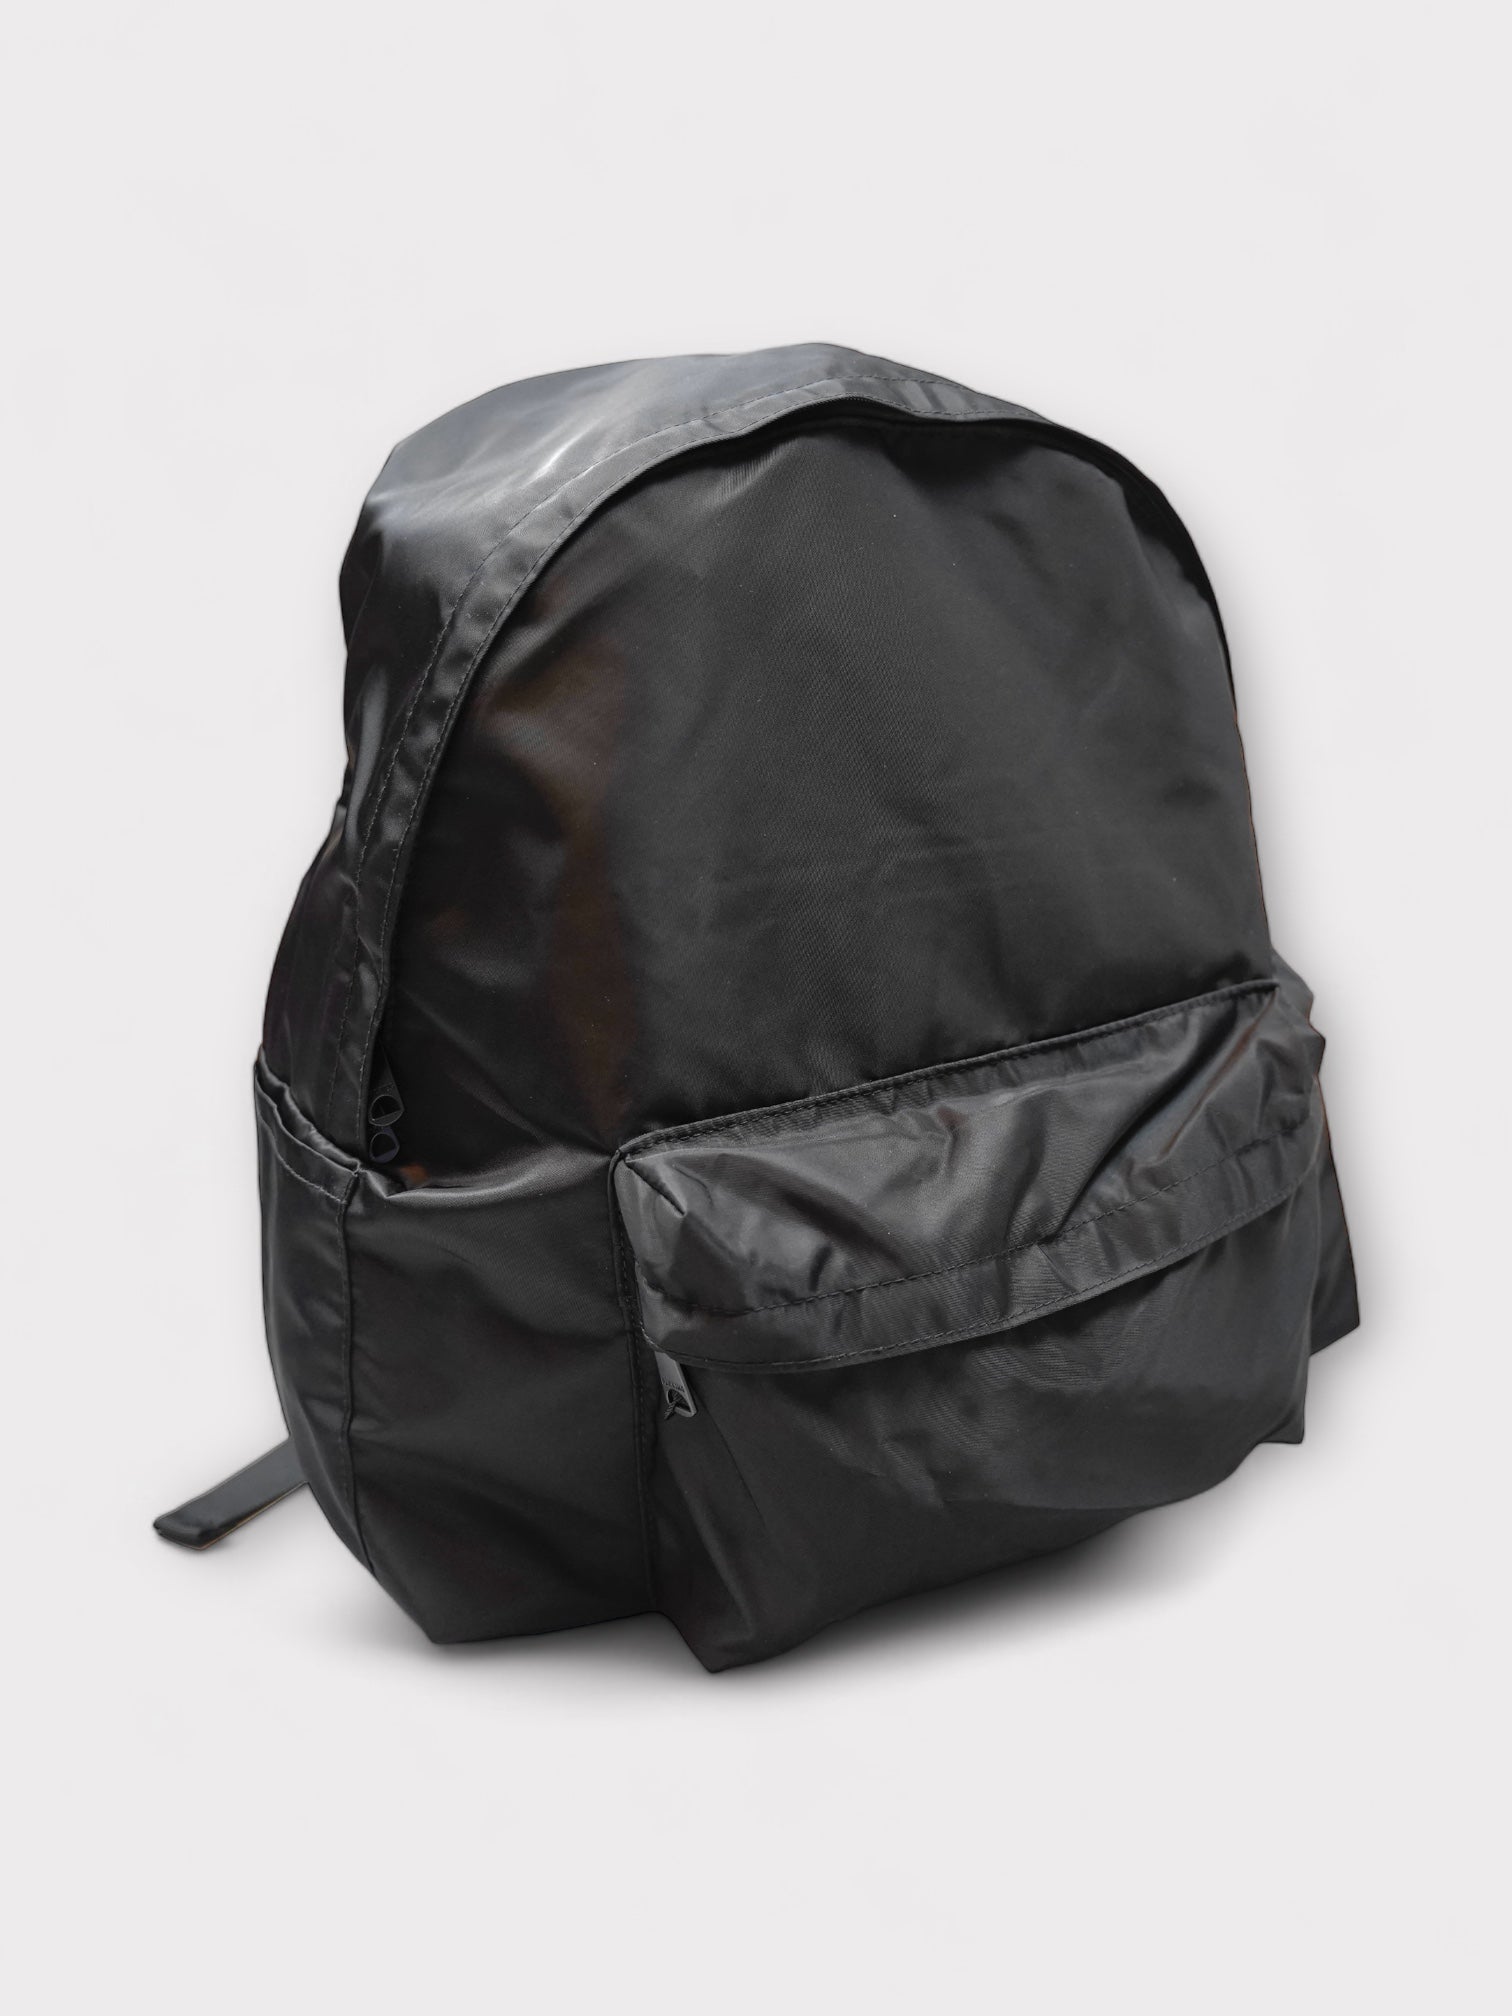 PACKING BACKPACK Twill PA-041 패킹 배낭